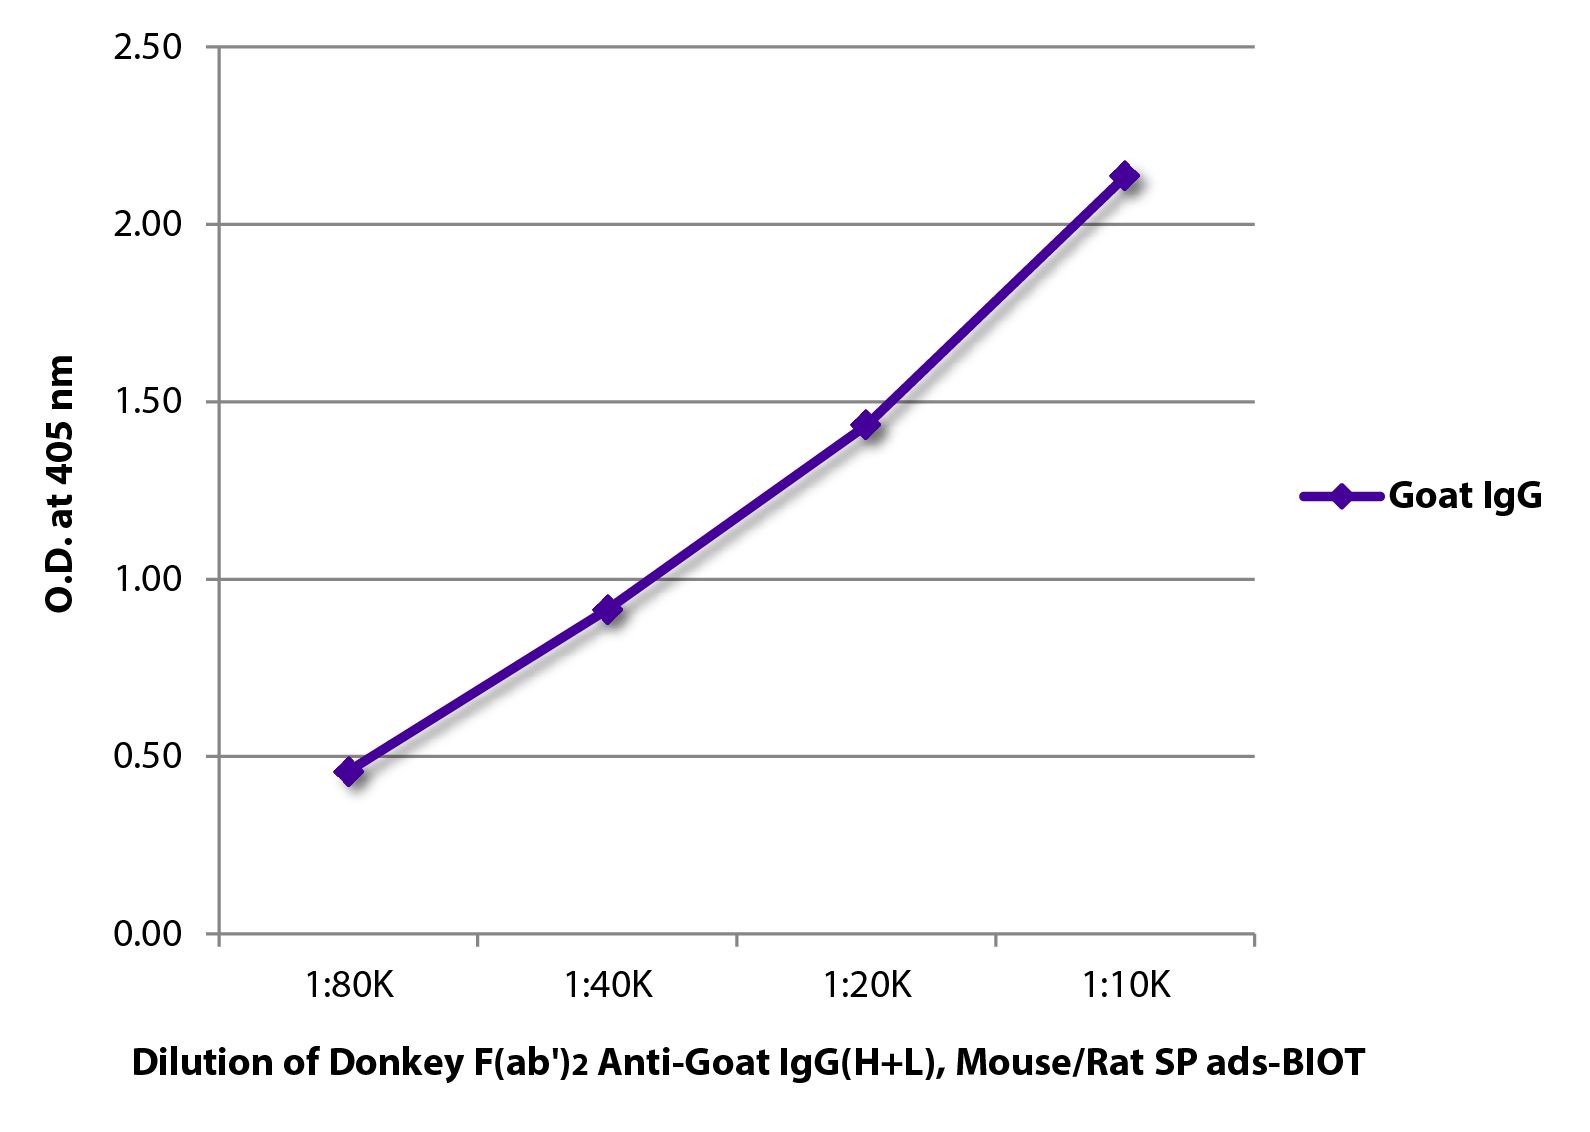 ELISA plate was coated with purified goat IgG.  Immunoglobulin was detected with Donkey F(ab')<sub>2</sub> Anti-Goat IgG(H+L), Mouse/Rat SP ads-BIOT (SB Cat. No. 6421-08) followed by Streptavidin-HRP (SB Cat. No. 7105-05).